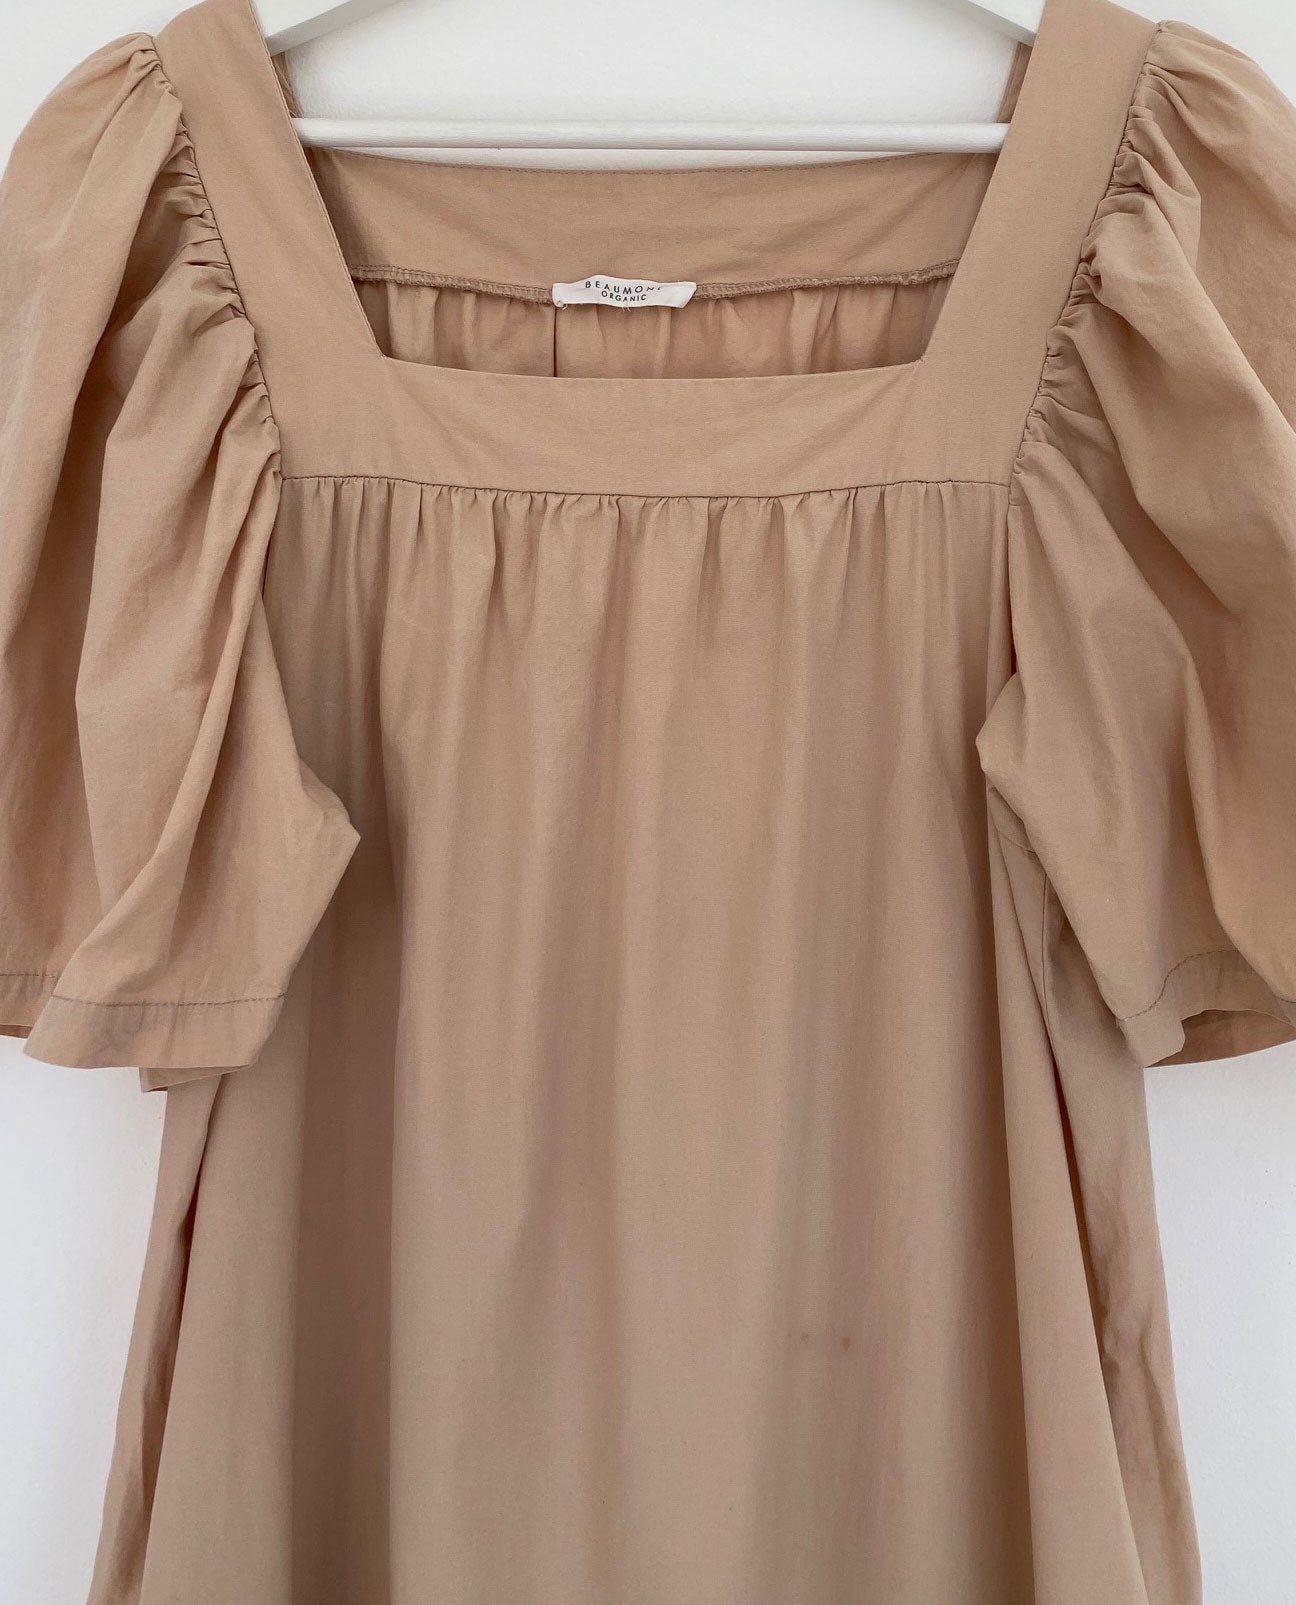 Lesley Organic Cotton Dress In Sand in S